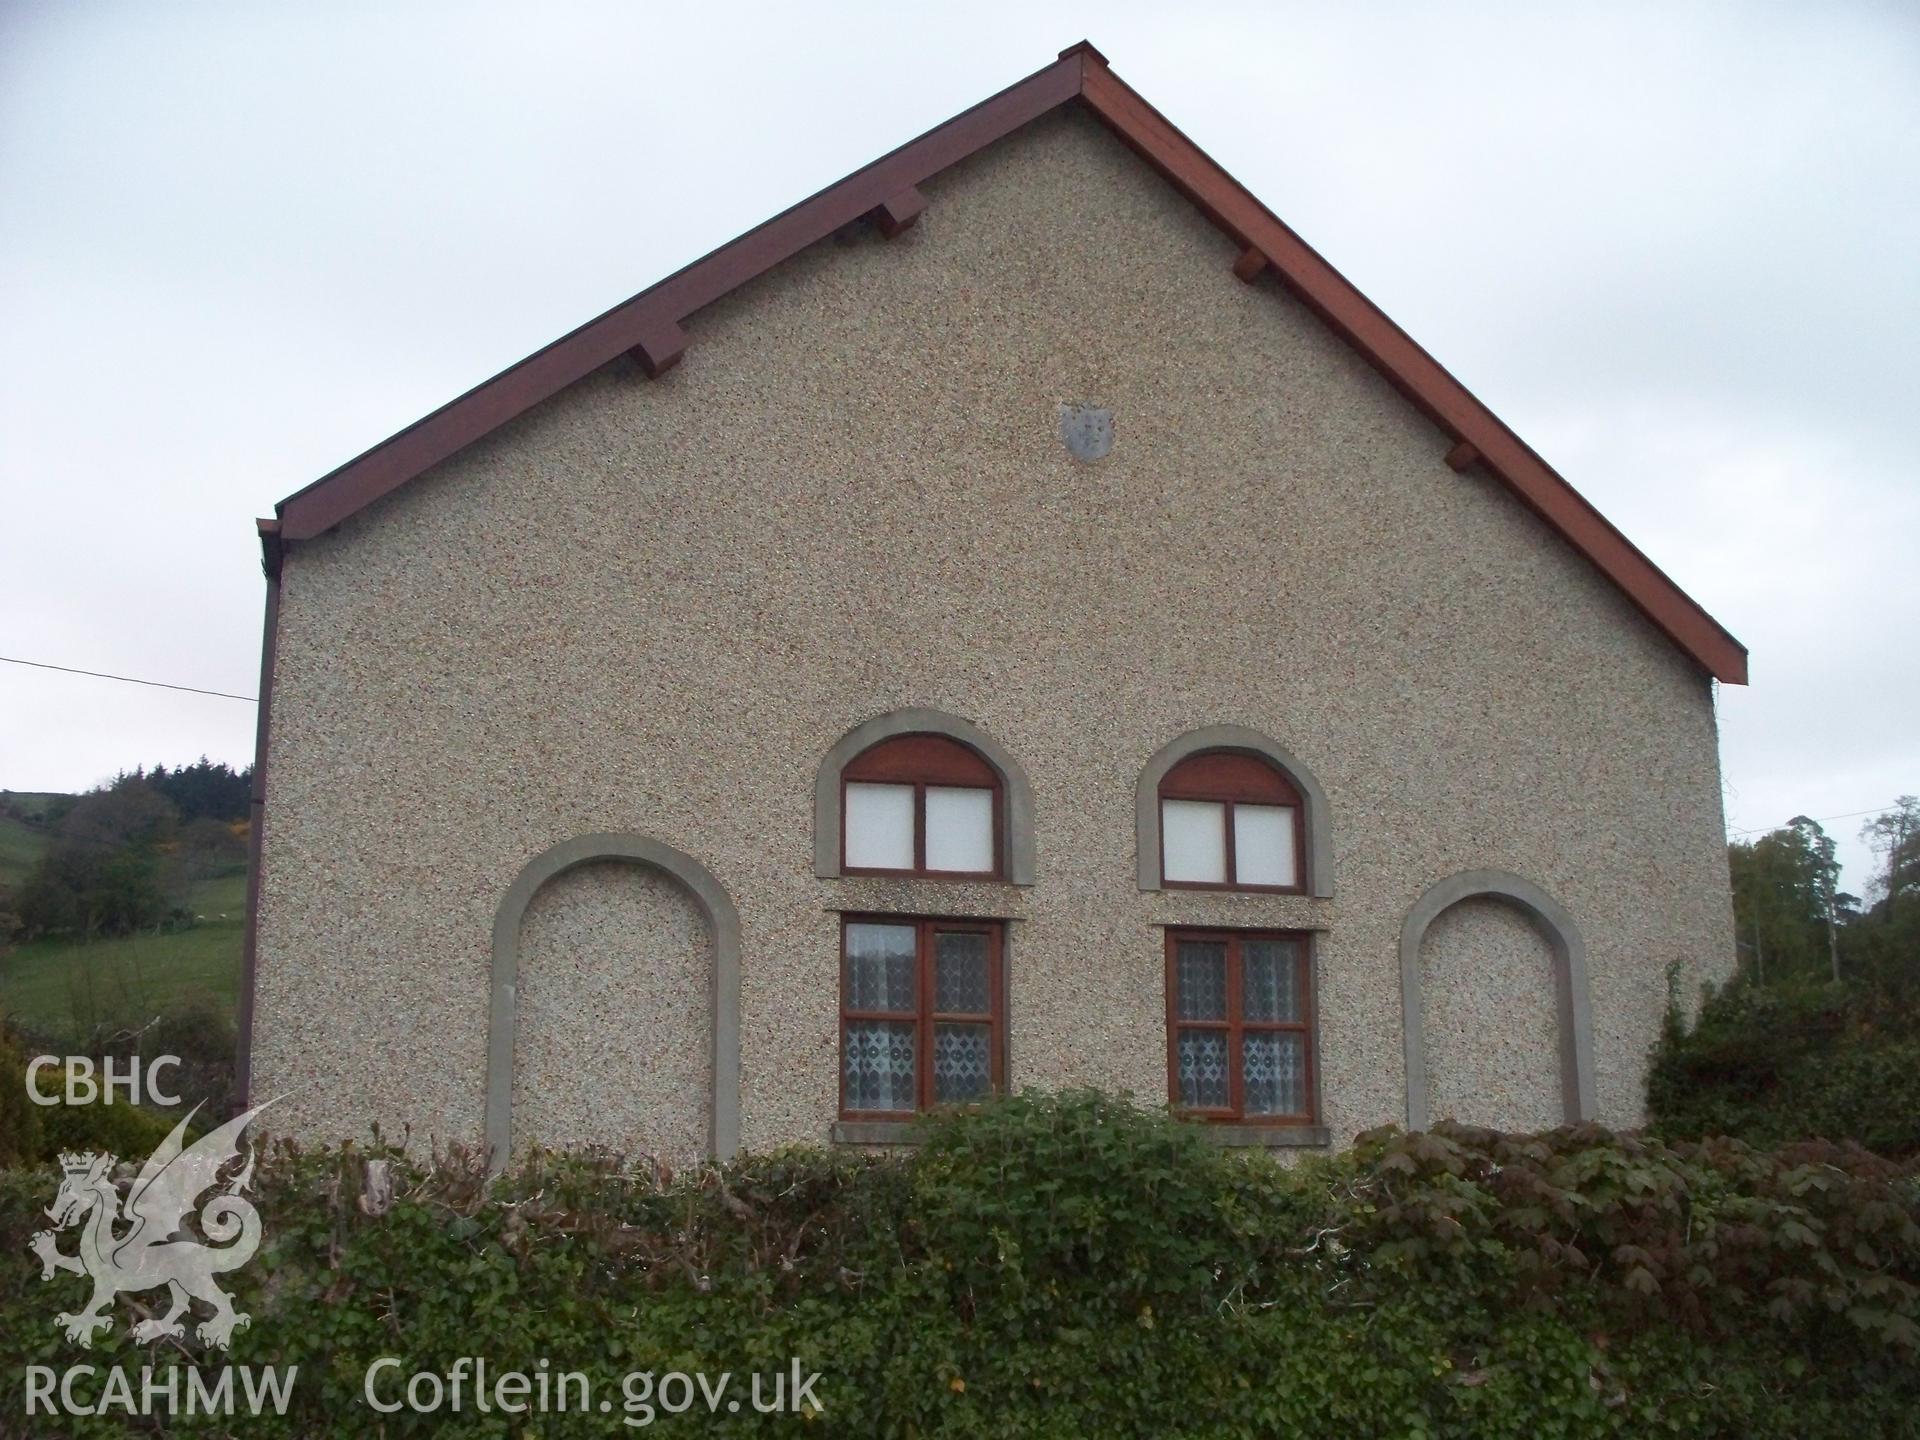 Gable end view.